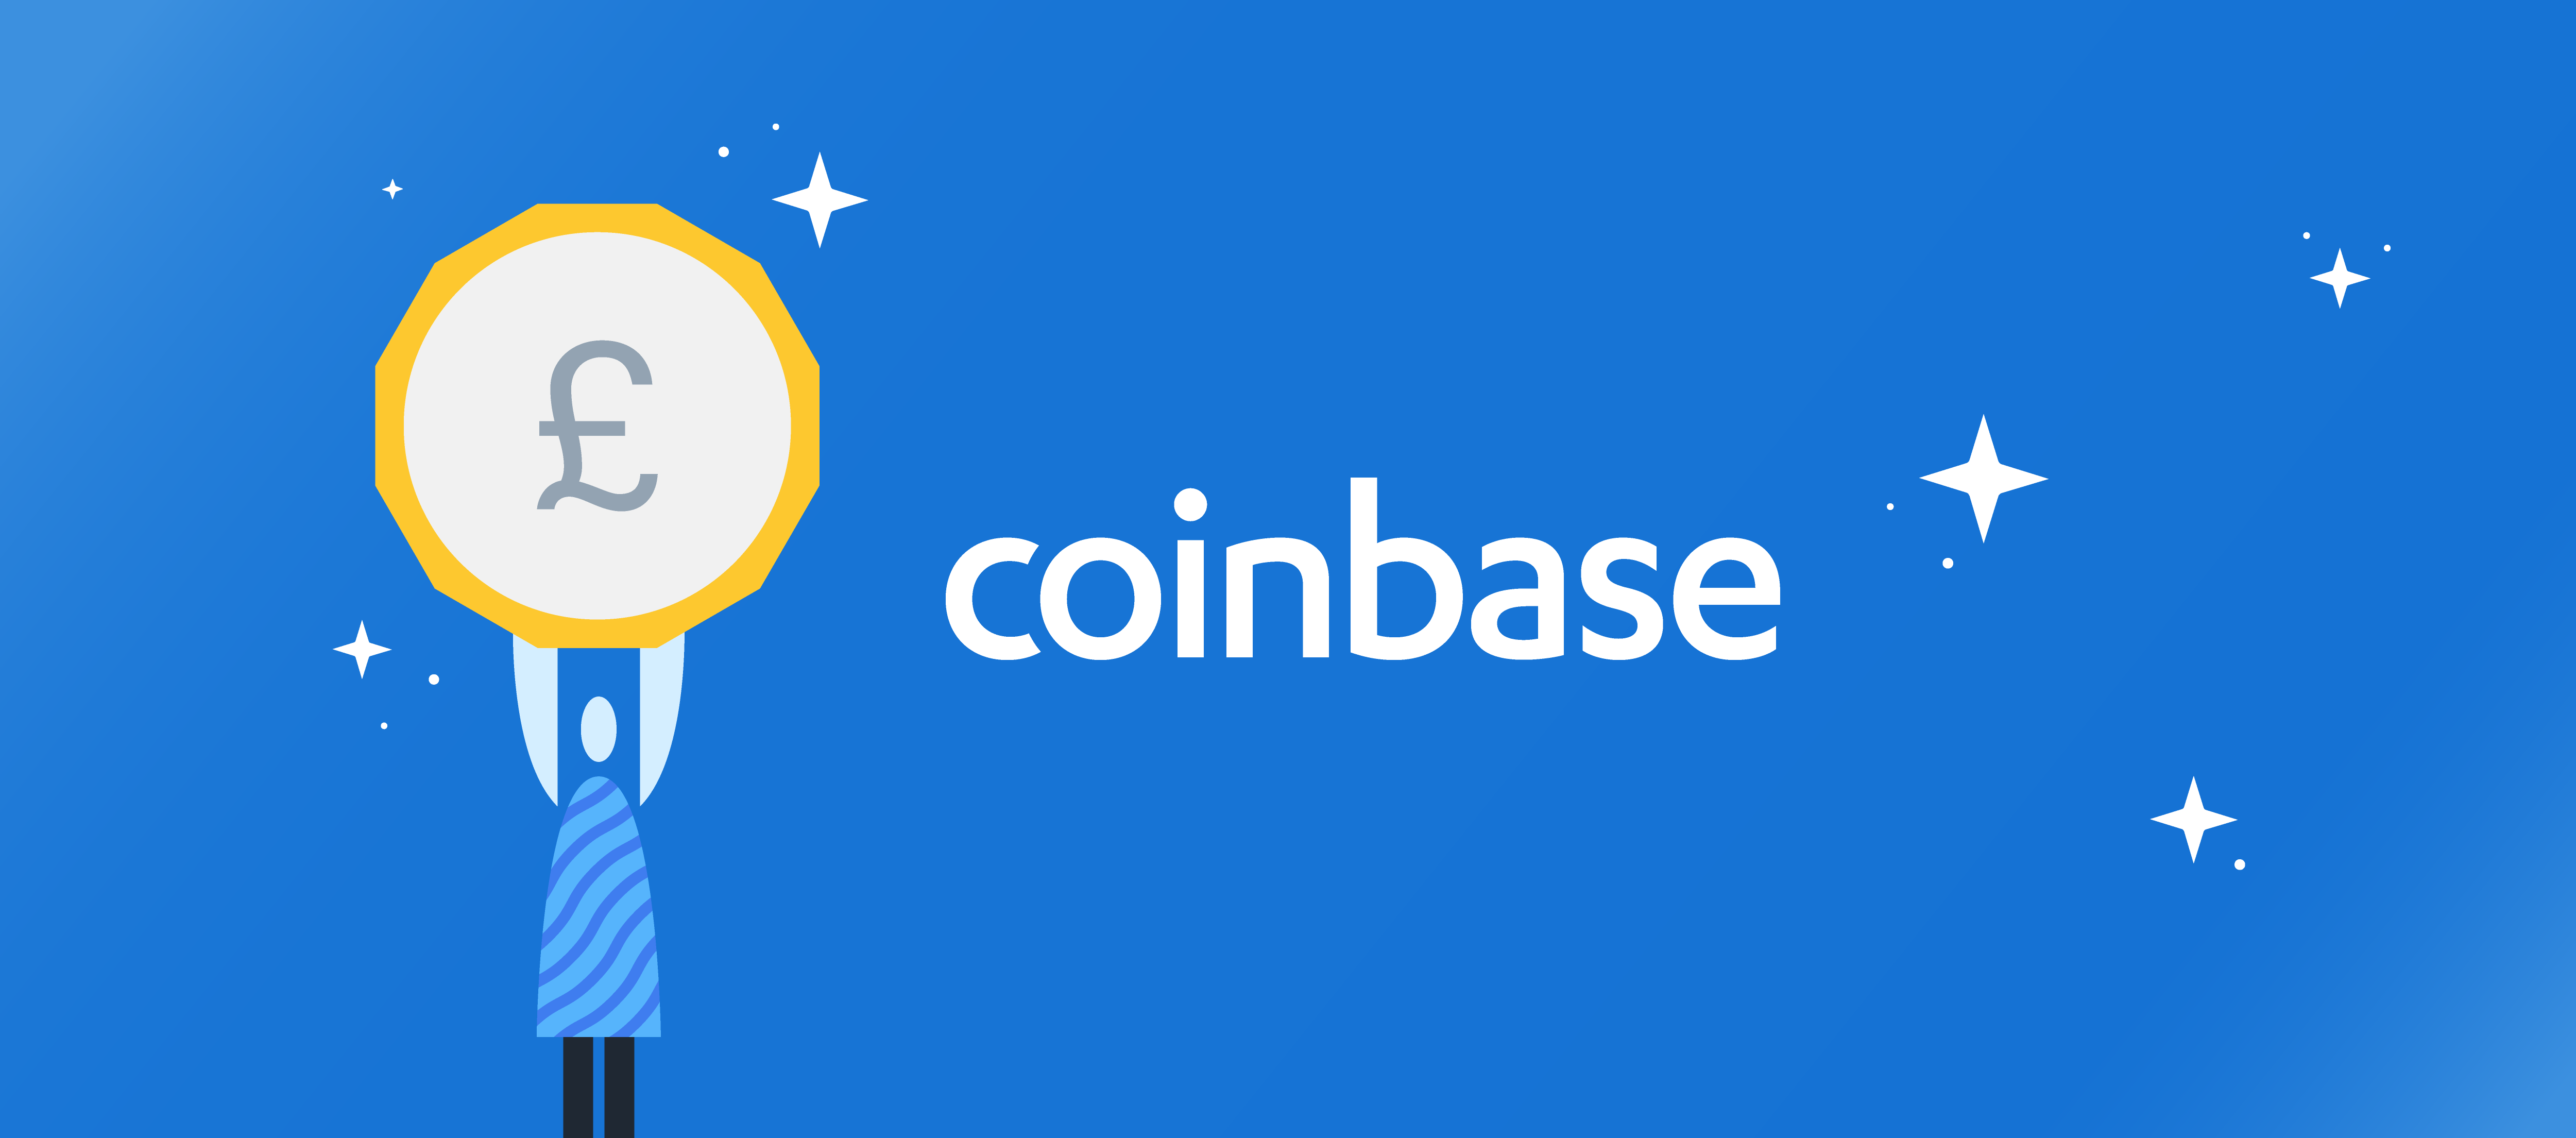 can you buy ethereum with bitcoin on coinbase